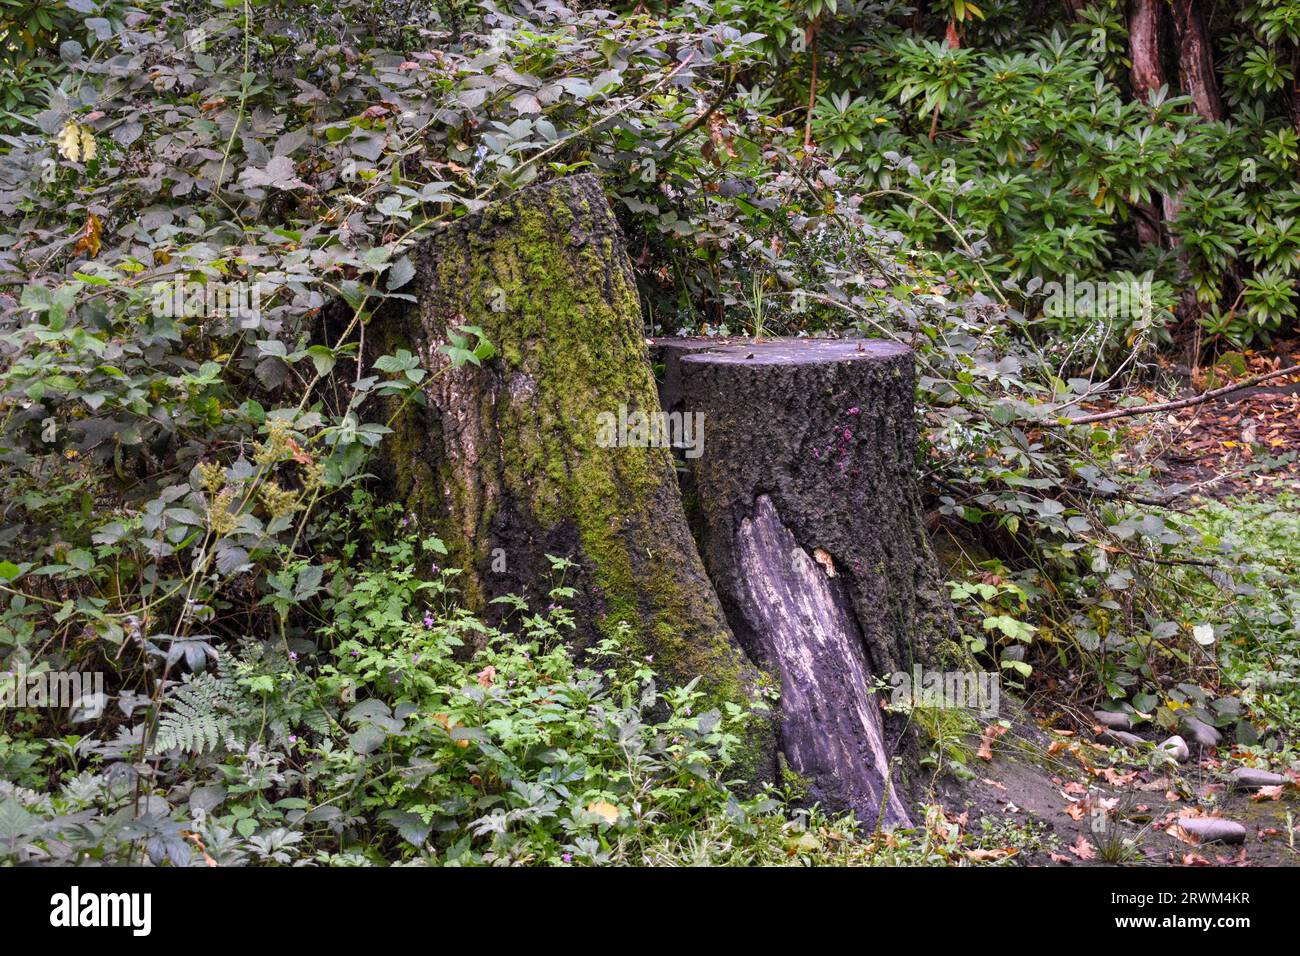 Two tree stumps hugging together, cut at different heights and partially covered by plant life in a dark wooded area of Cumbria. Stock Photo